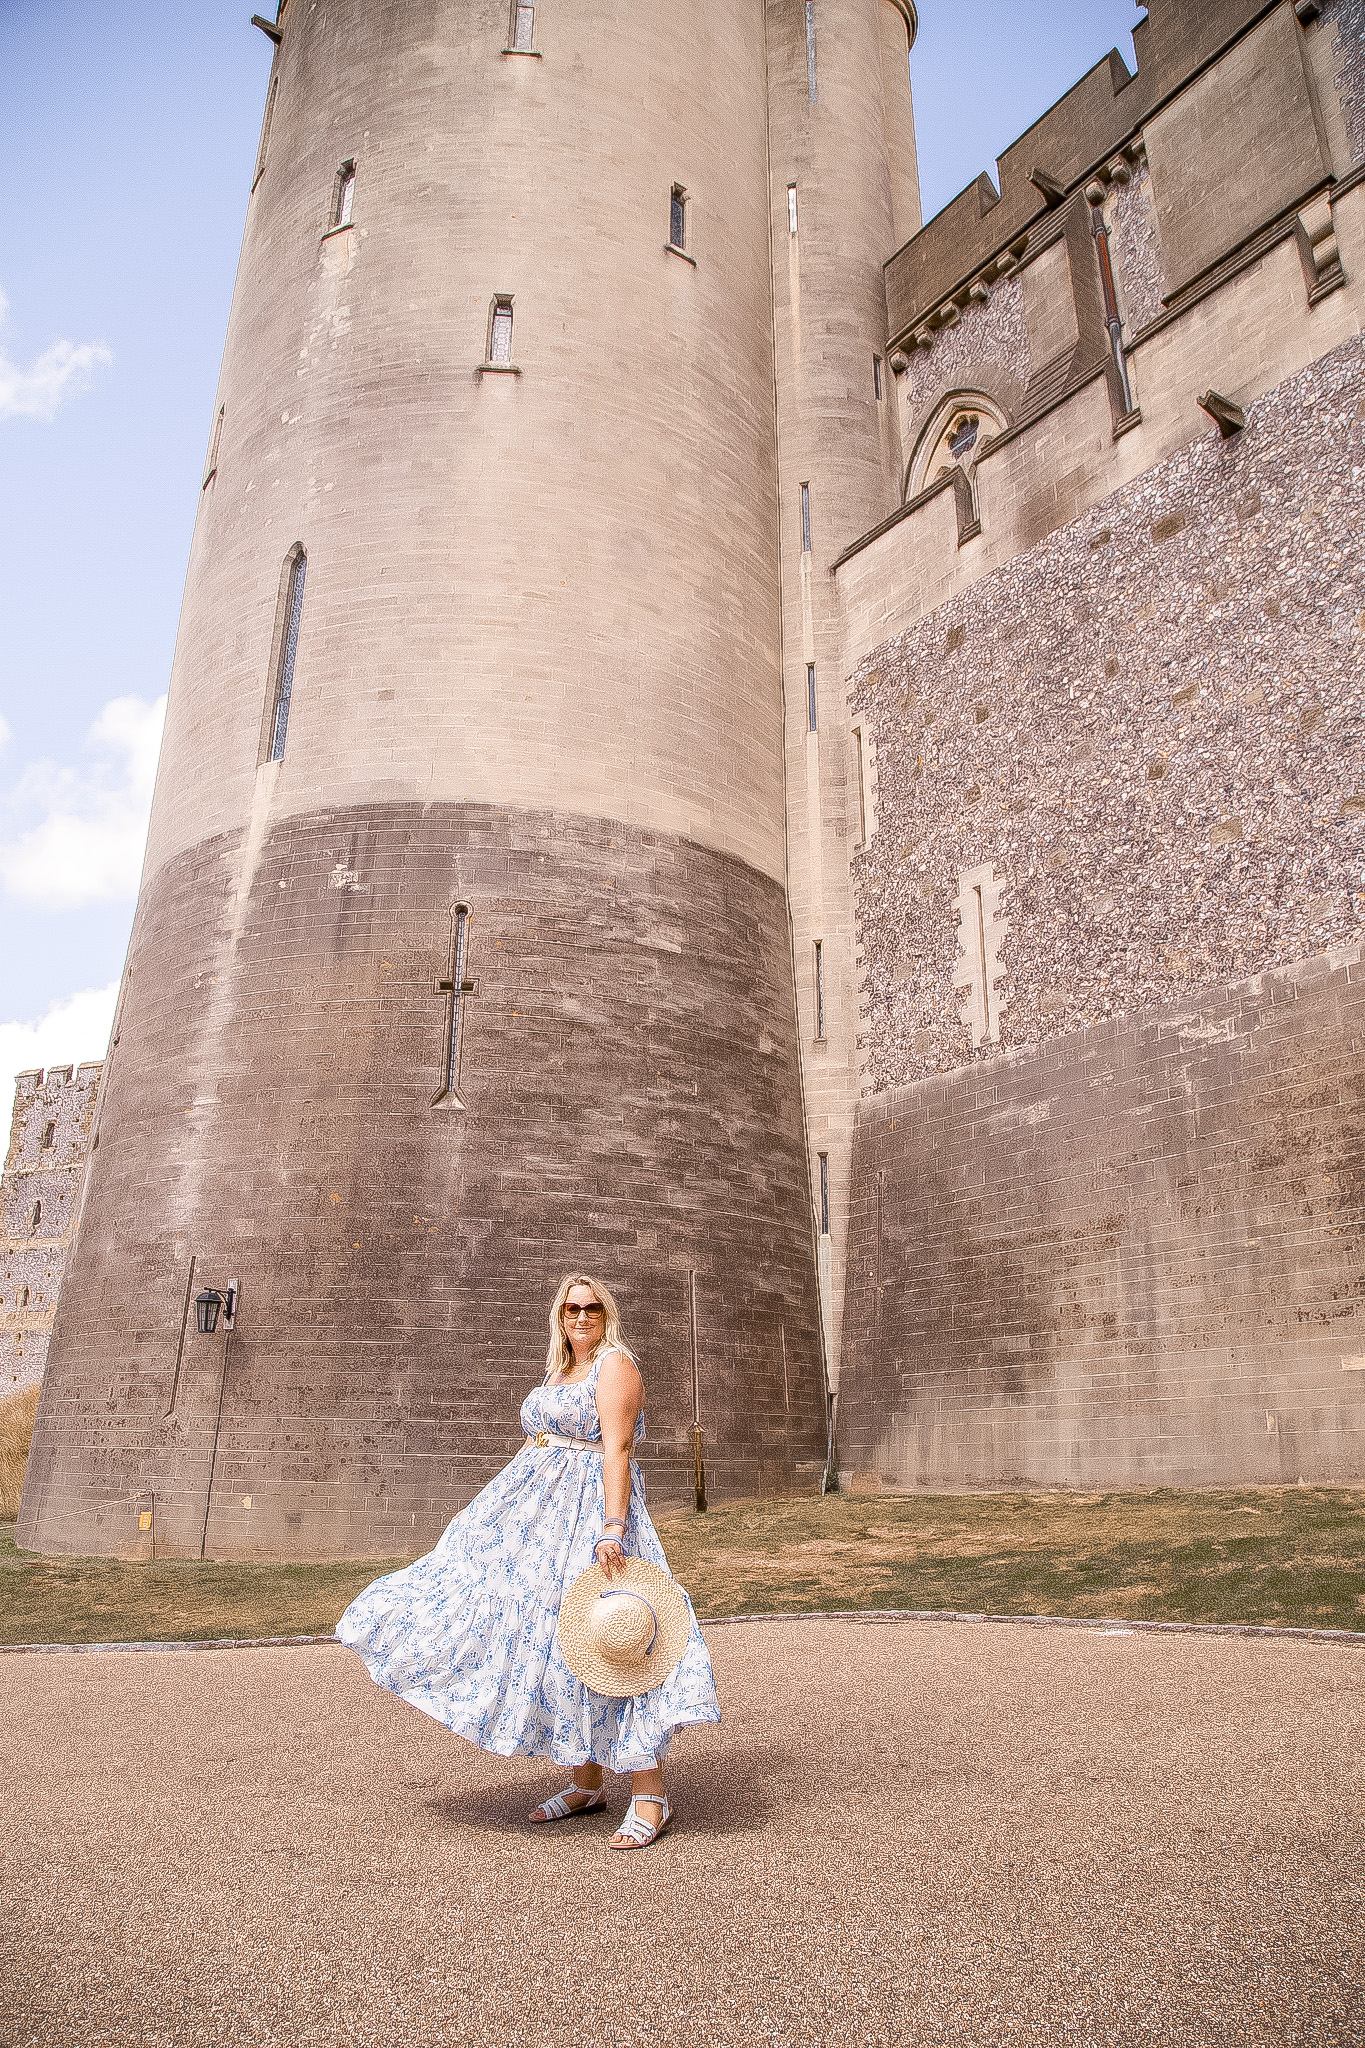 lucy is swisshing her maxi dress and holding a straw hat in front of a massive tower section of the castle